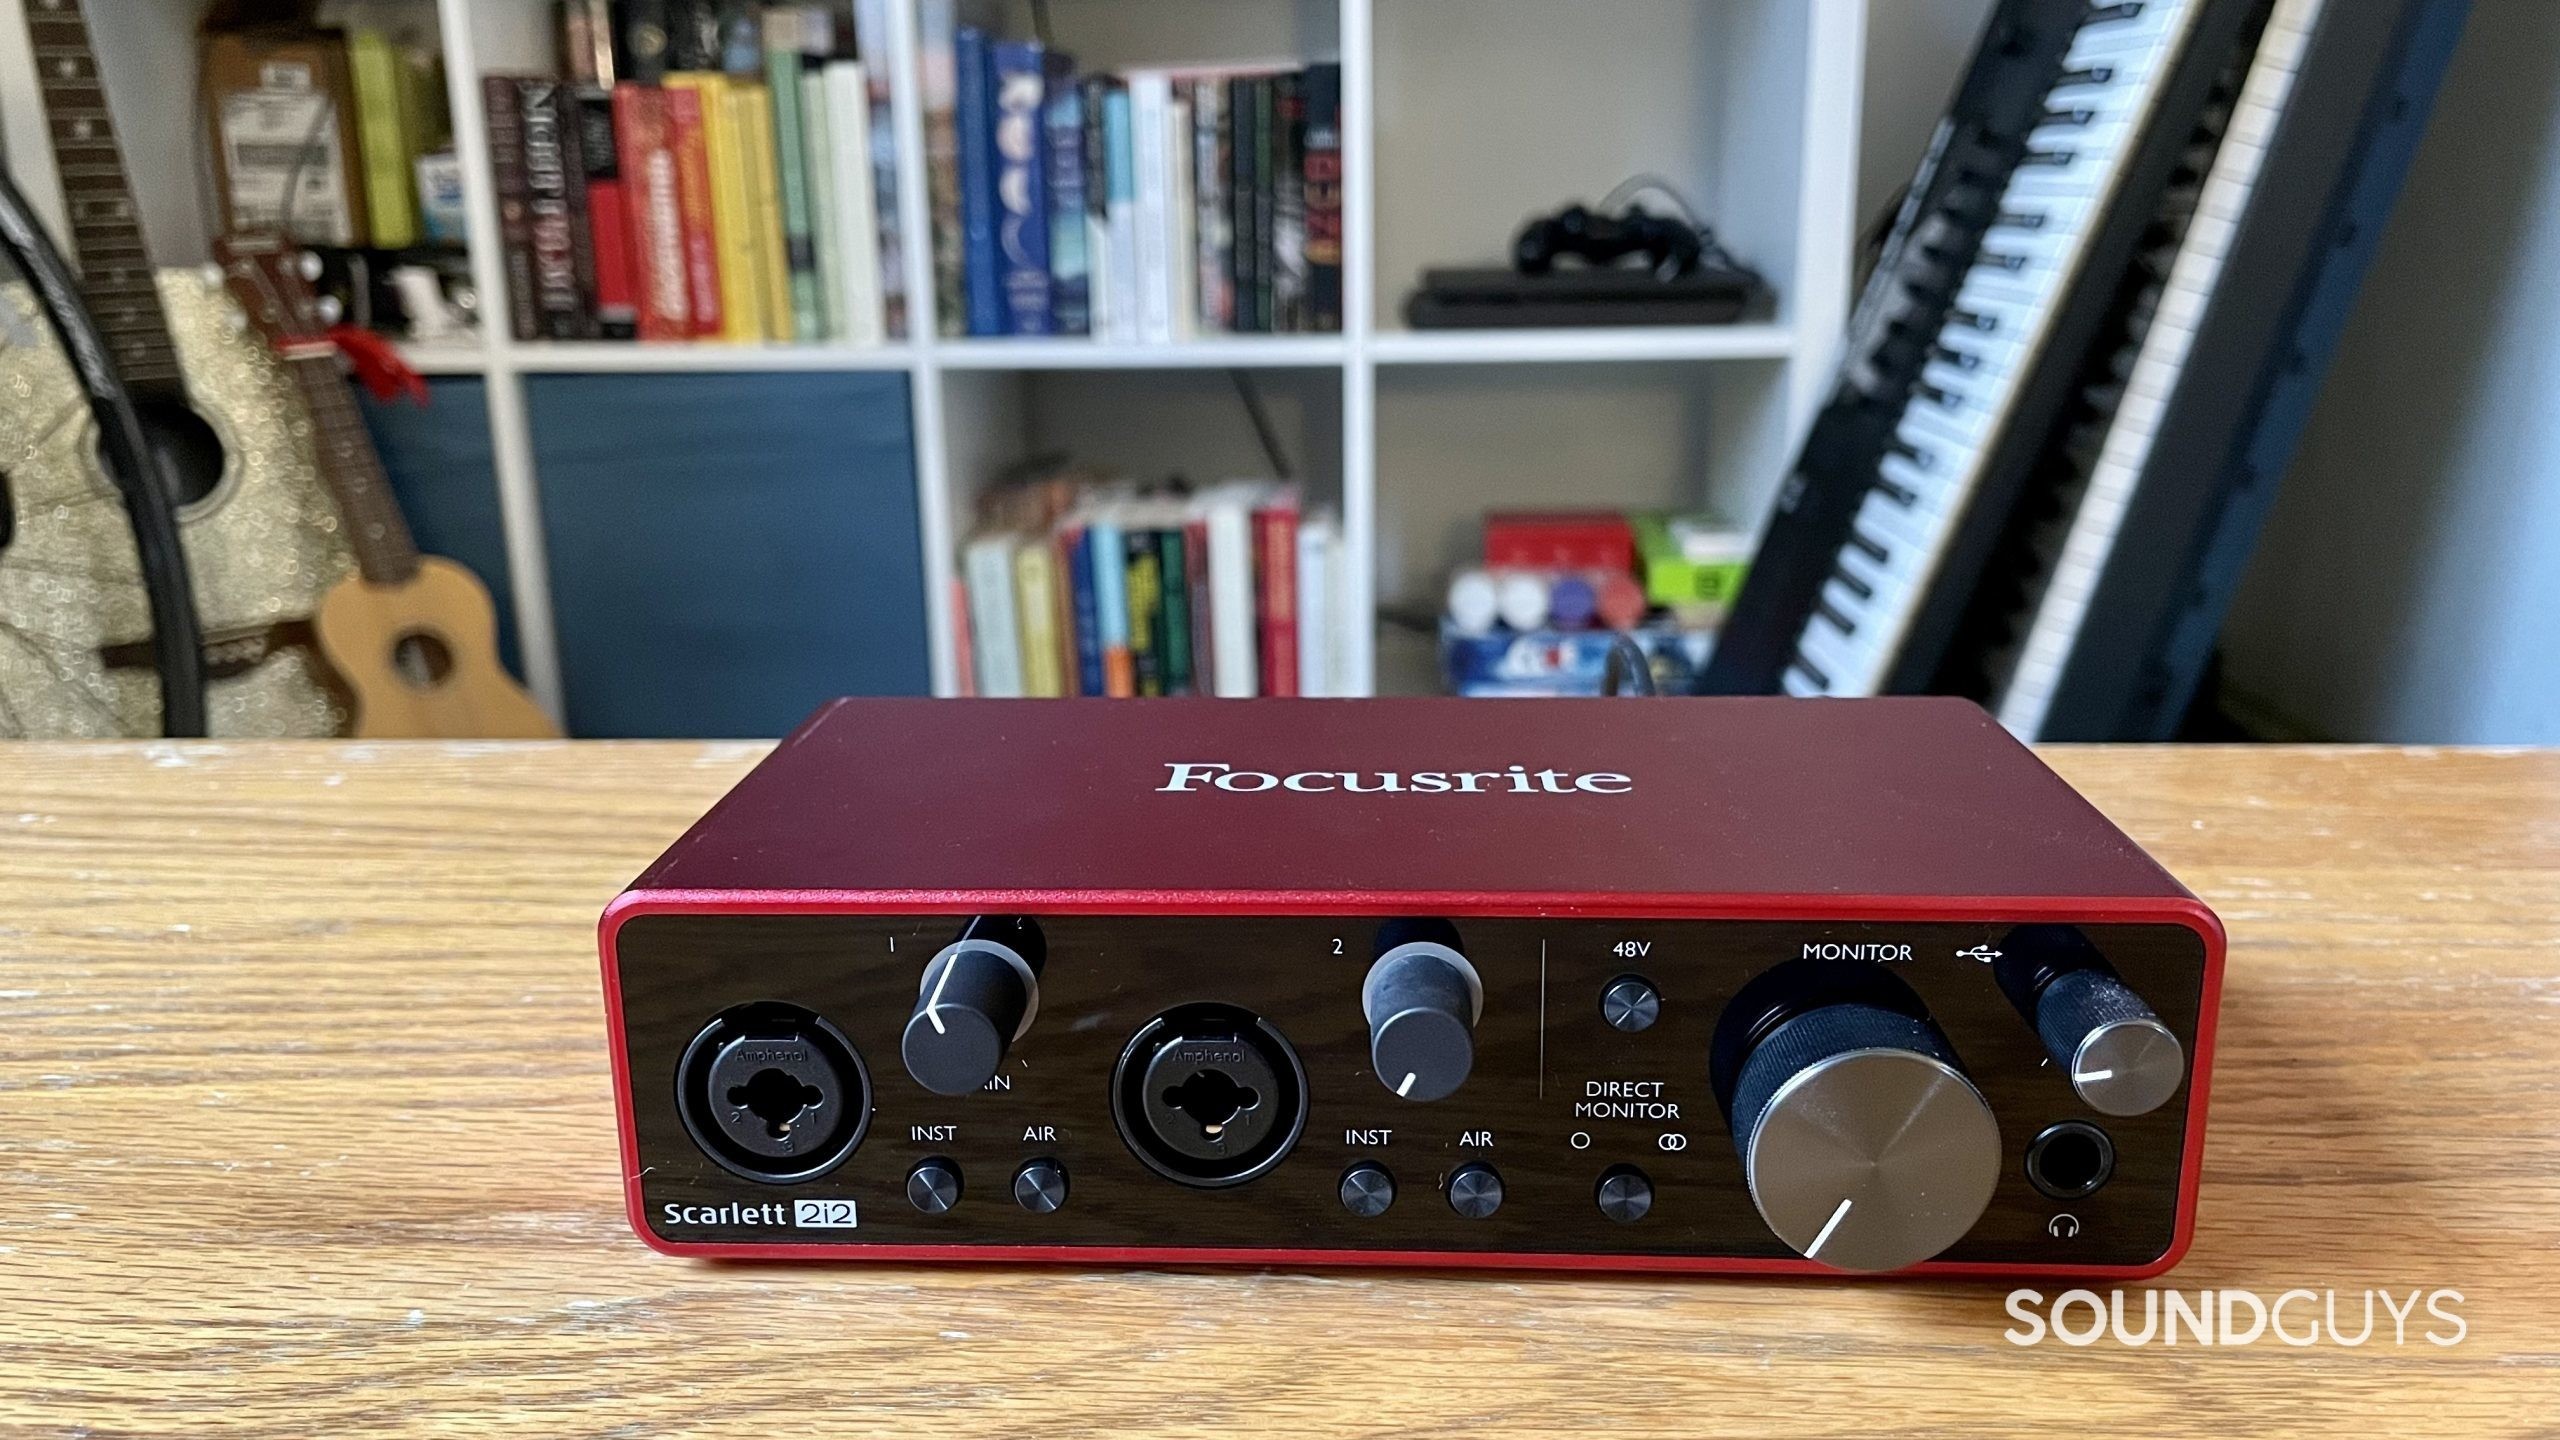 Focusrite Scarlett 2i2 on a table with a bookshelf and instruments in the background.